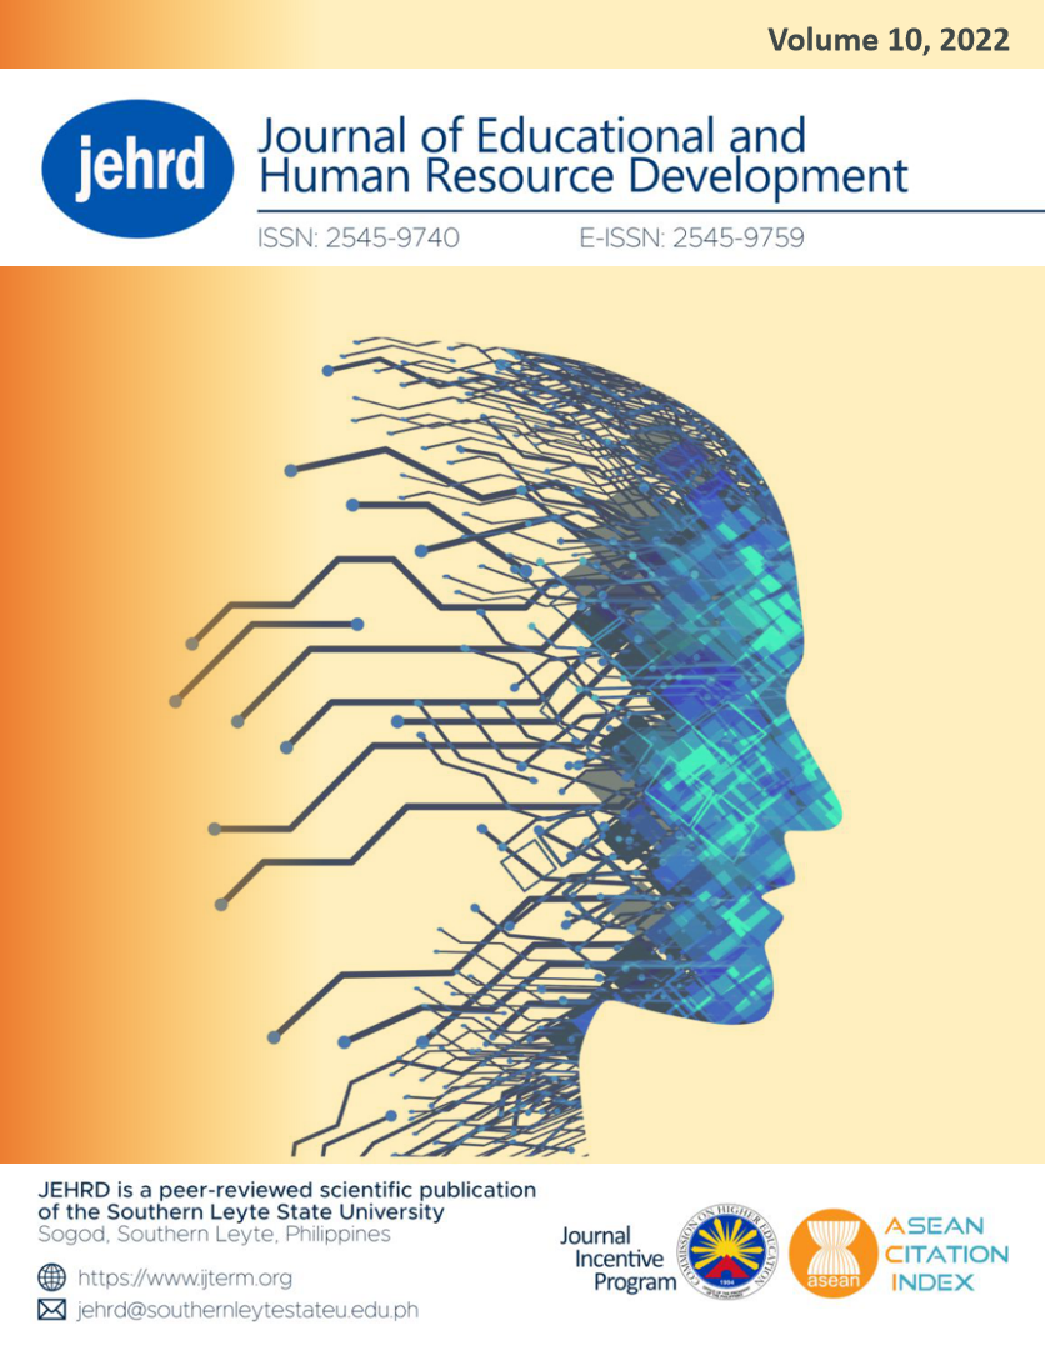 					View Vol. 10 (2022):  Journal of Educational and Human Resource Development
				